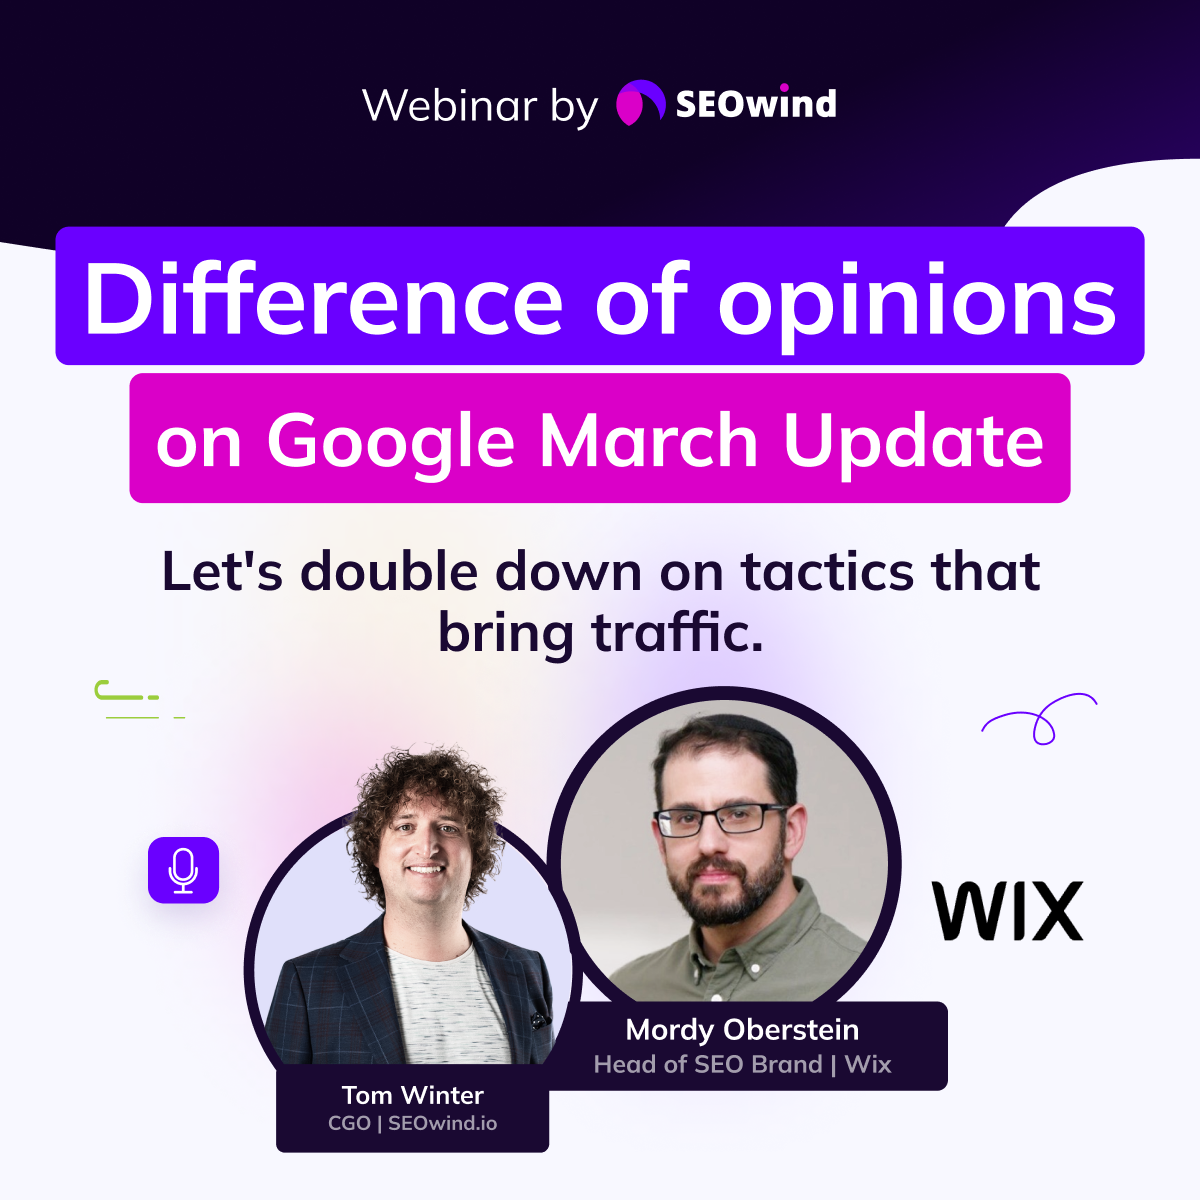 Webinar with Mordy Oberstein from Wix